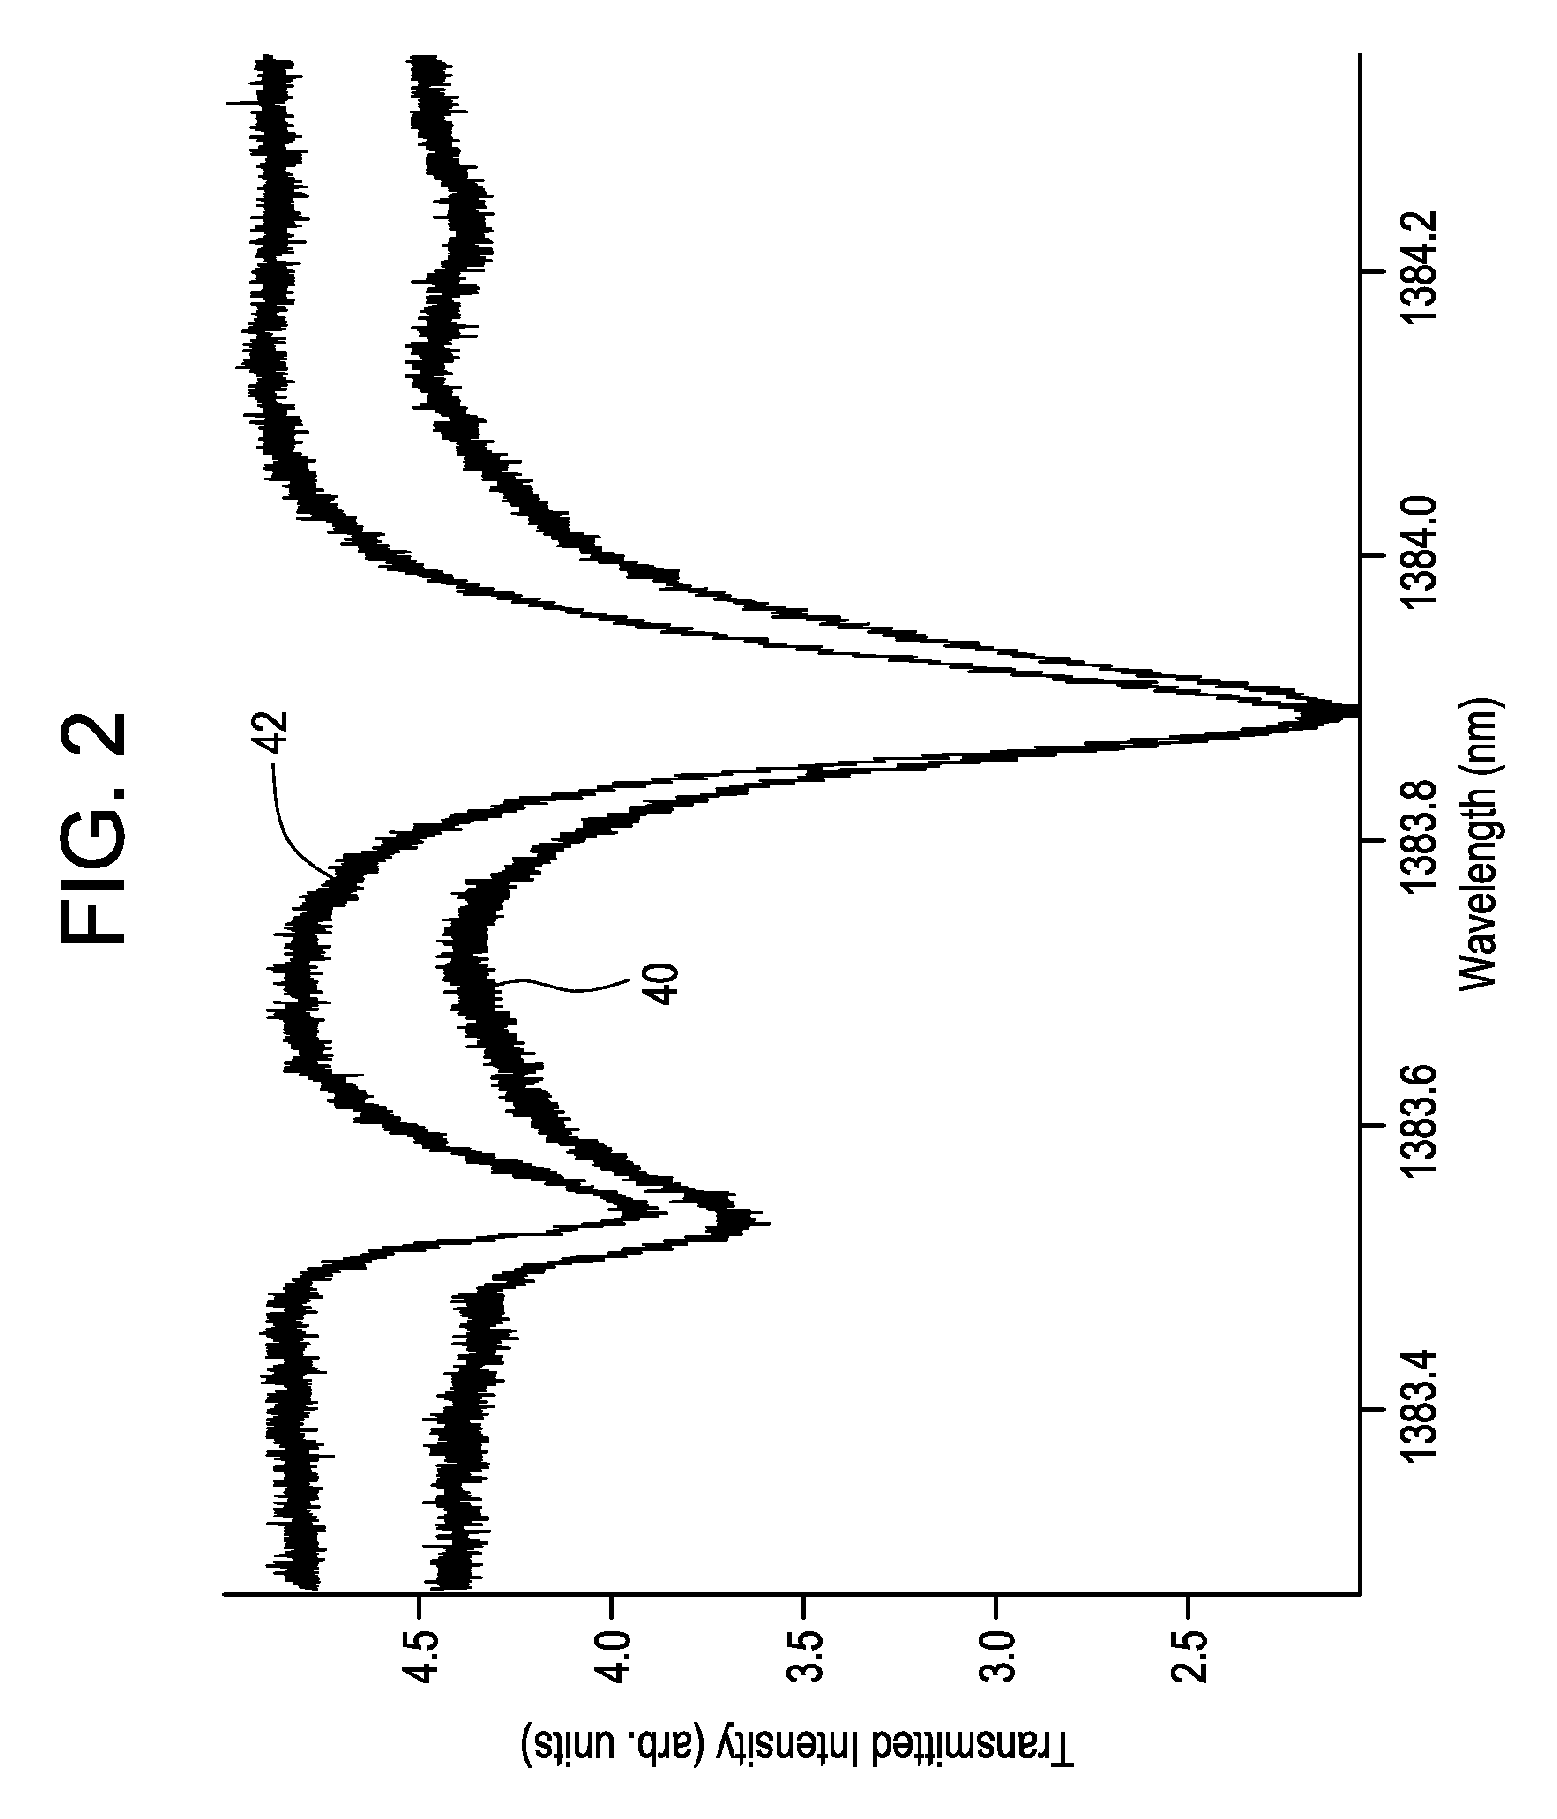 Apparatus and Method for Measuring Steam Quality